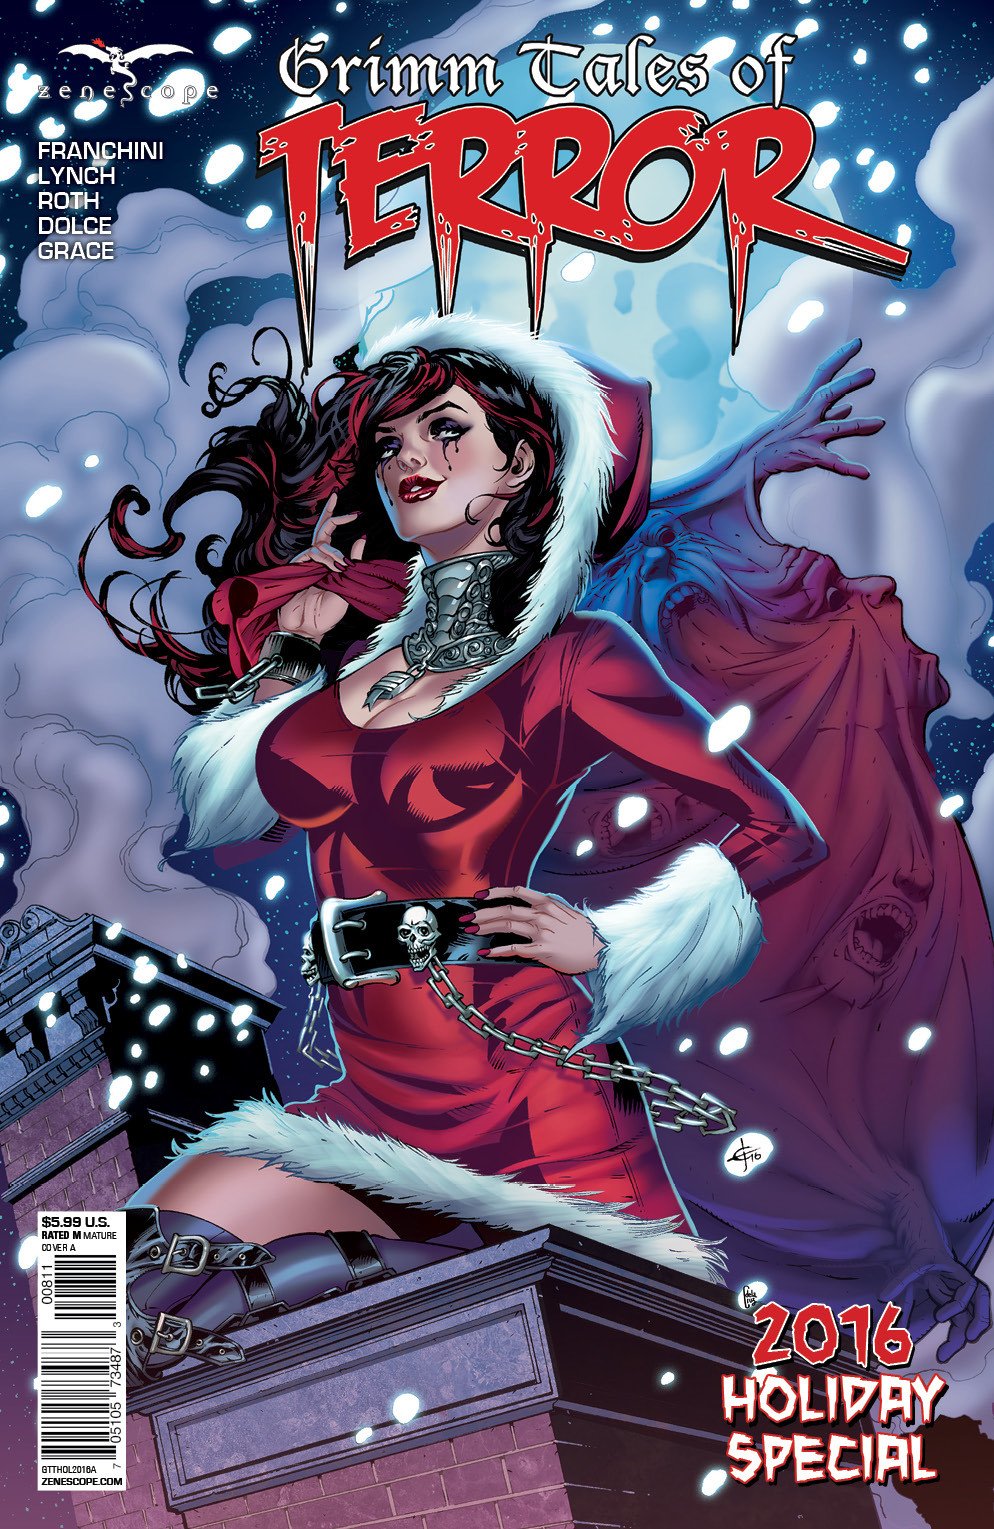 Image of Grimm Tales of Terror Holiday Special 2016